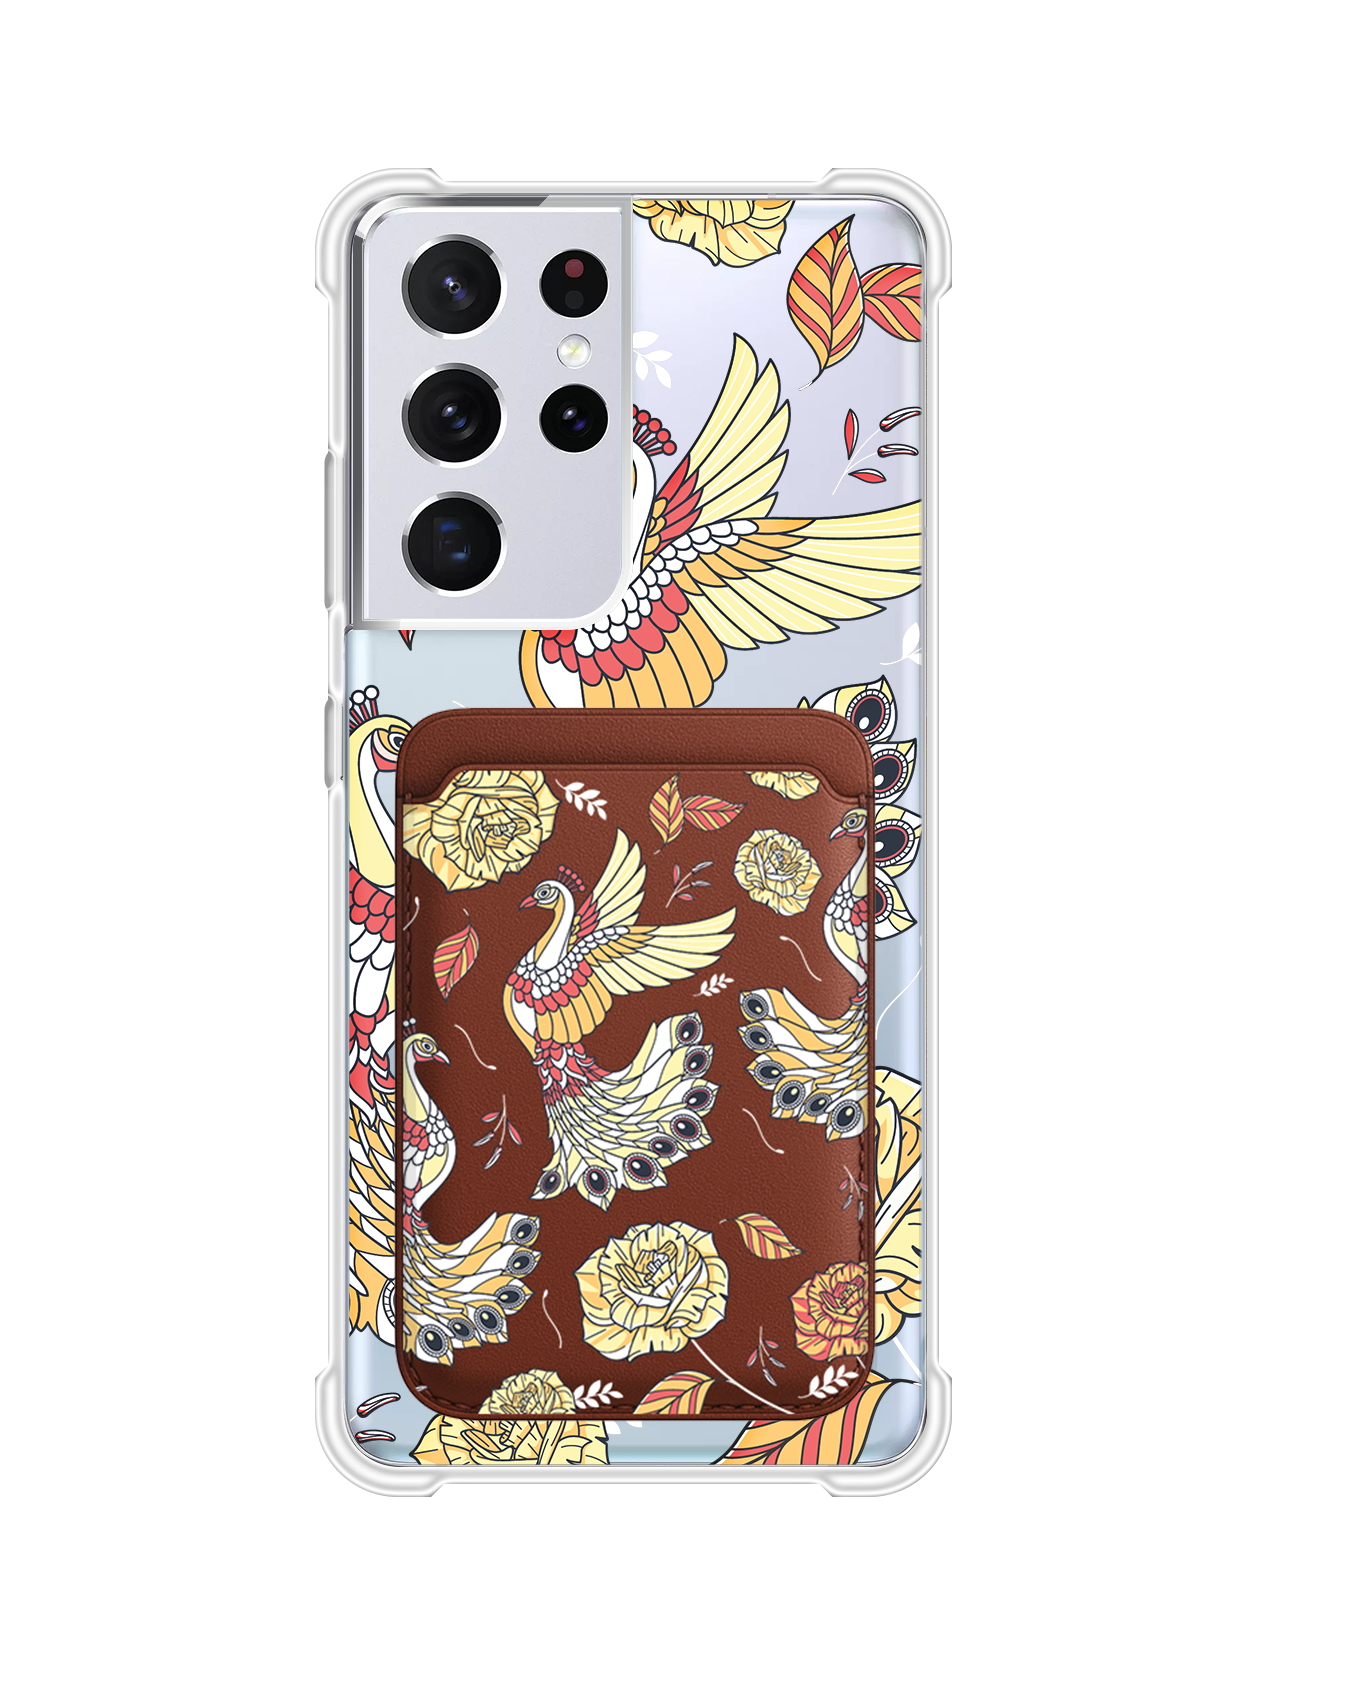 Android Magnetic Wallet Case - Bird of Paradise 5.0